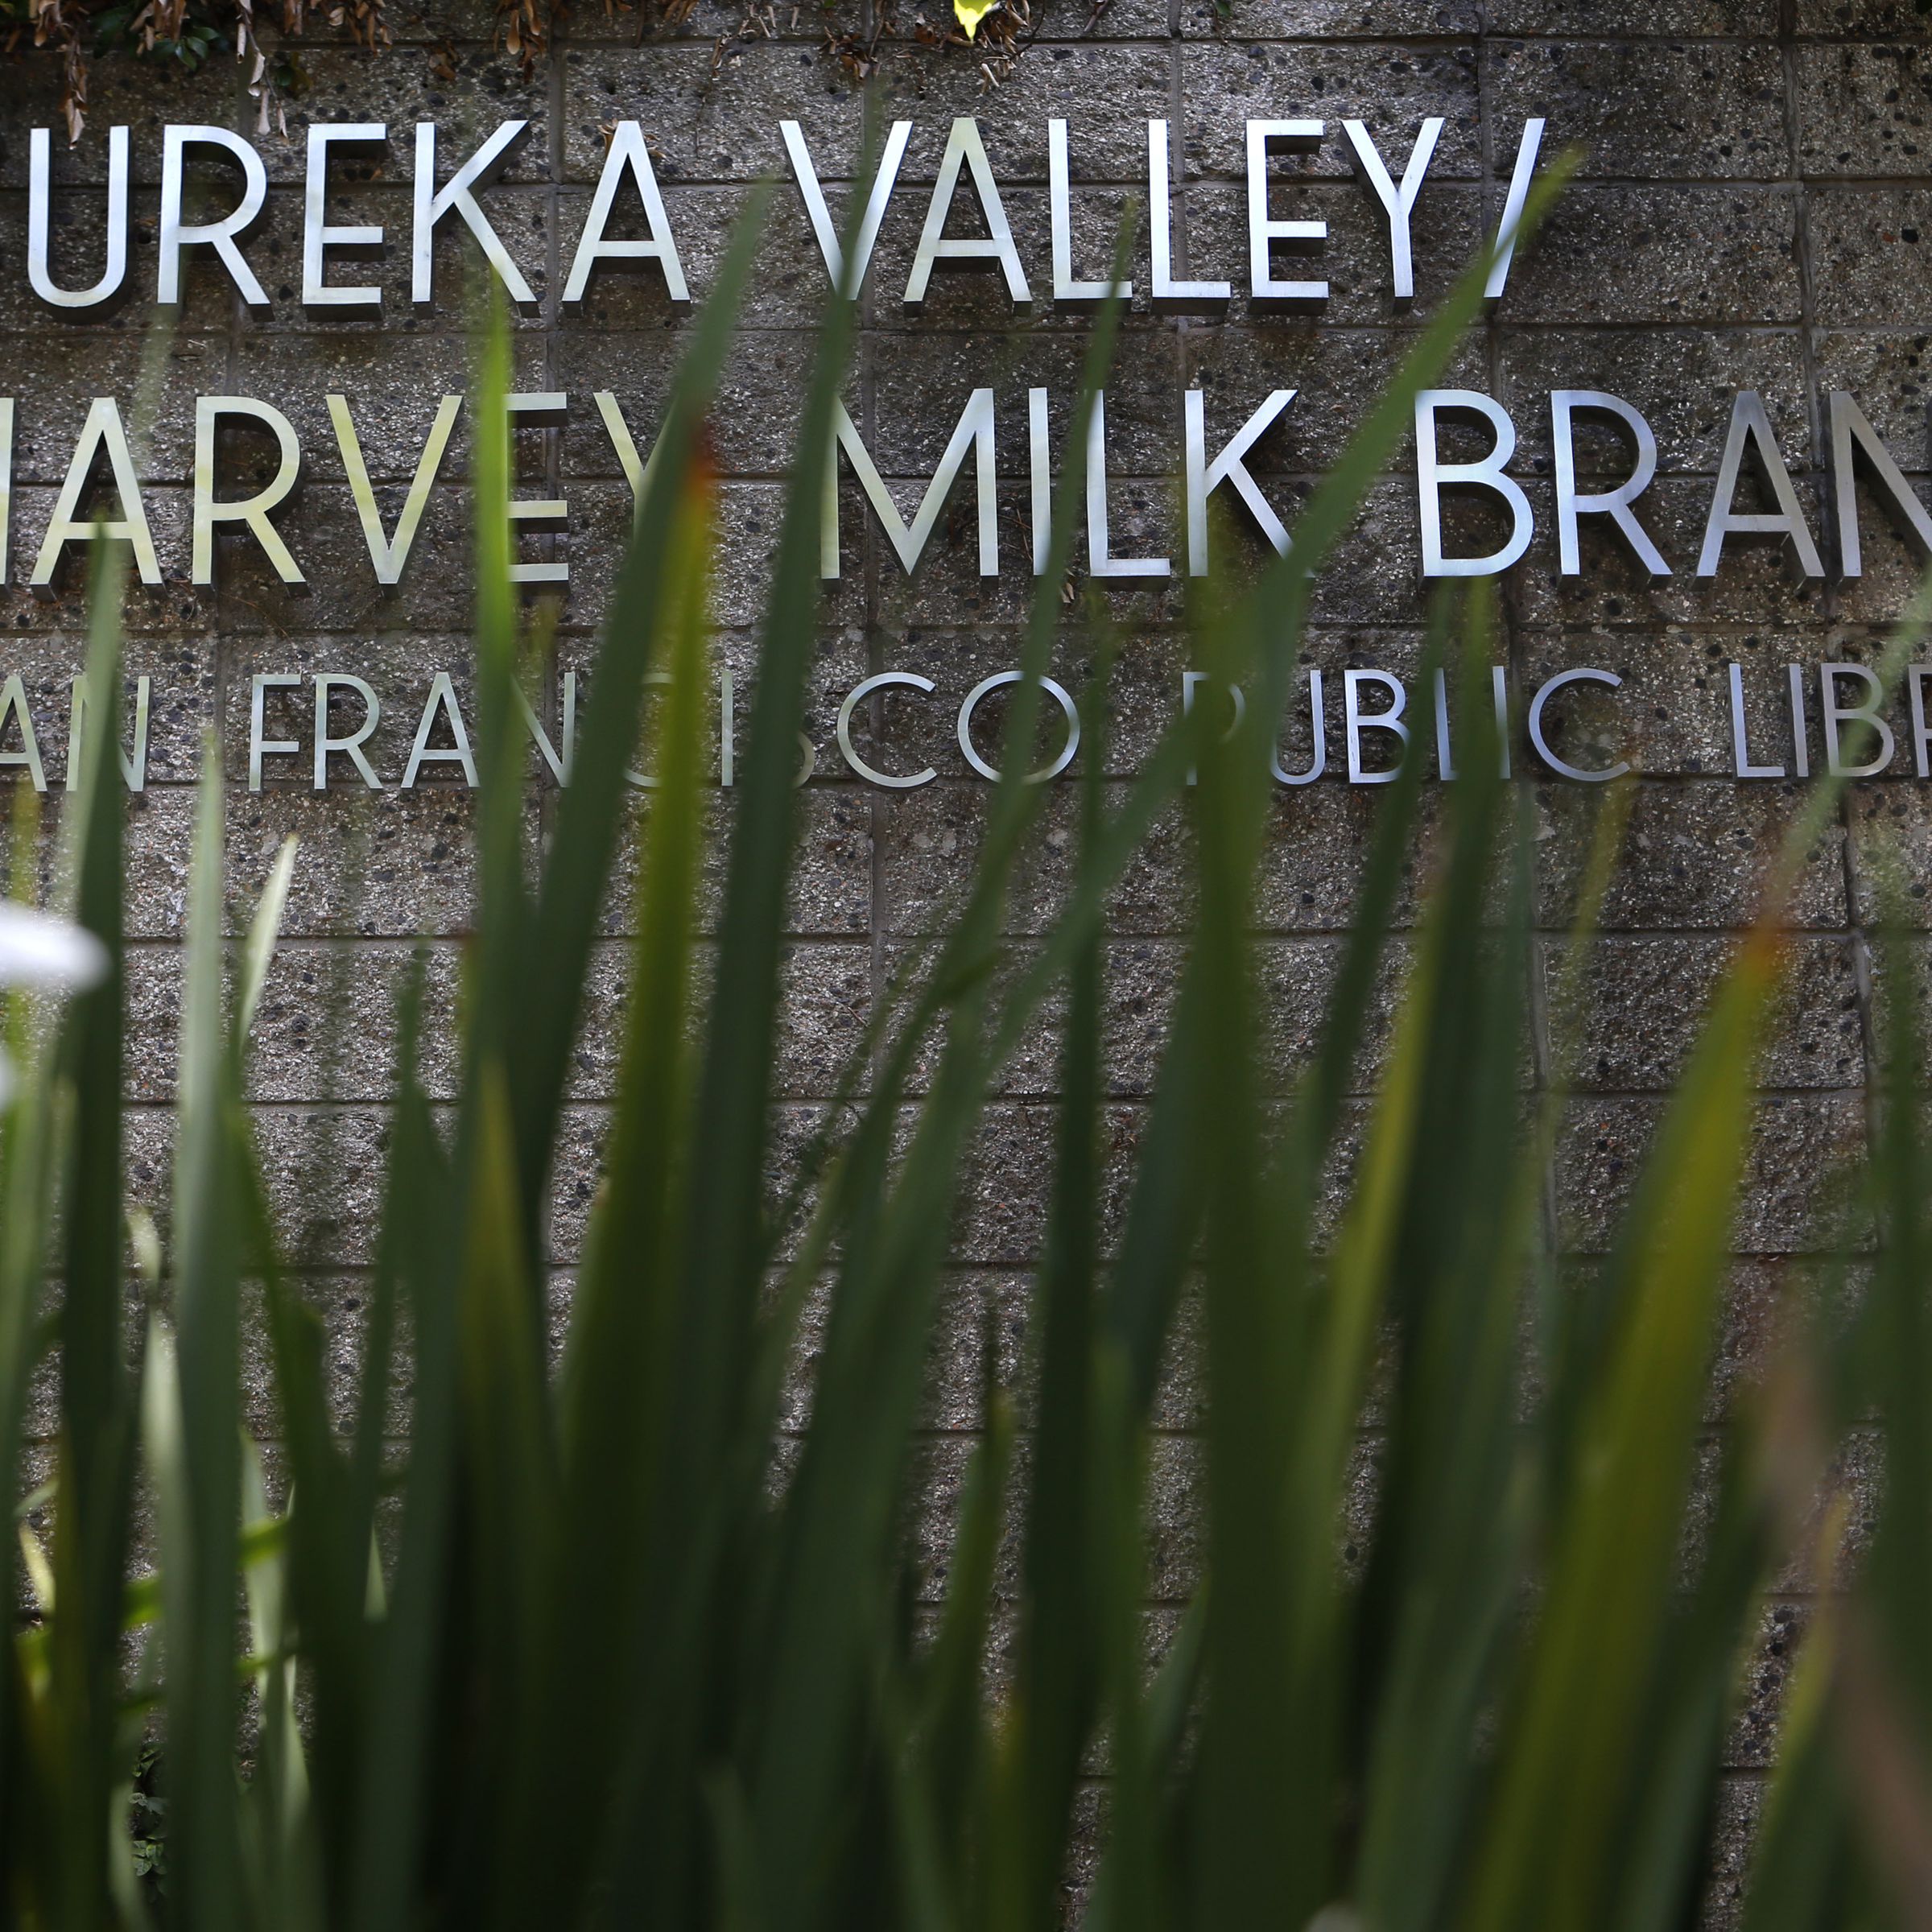 The Eureka Valley/Harvey Milk Memorial branch library sign in San Francisco, California, on Wednesday, May 7th, 2014.